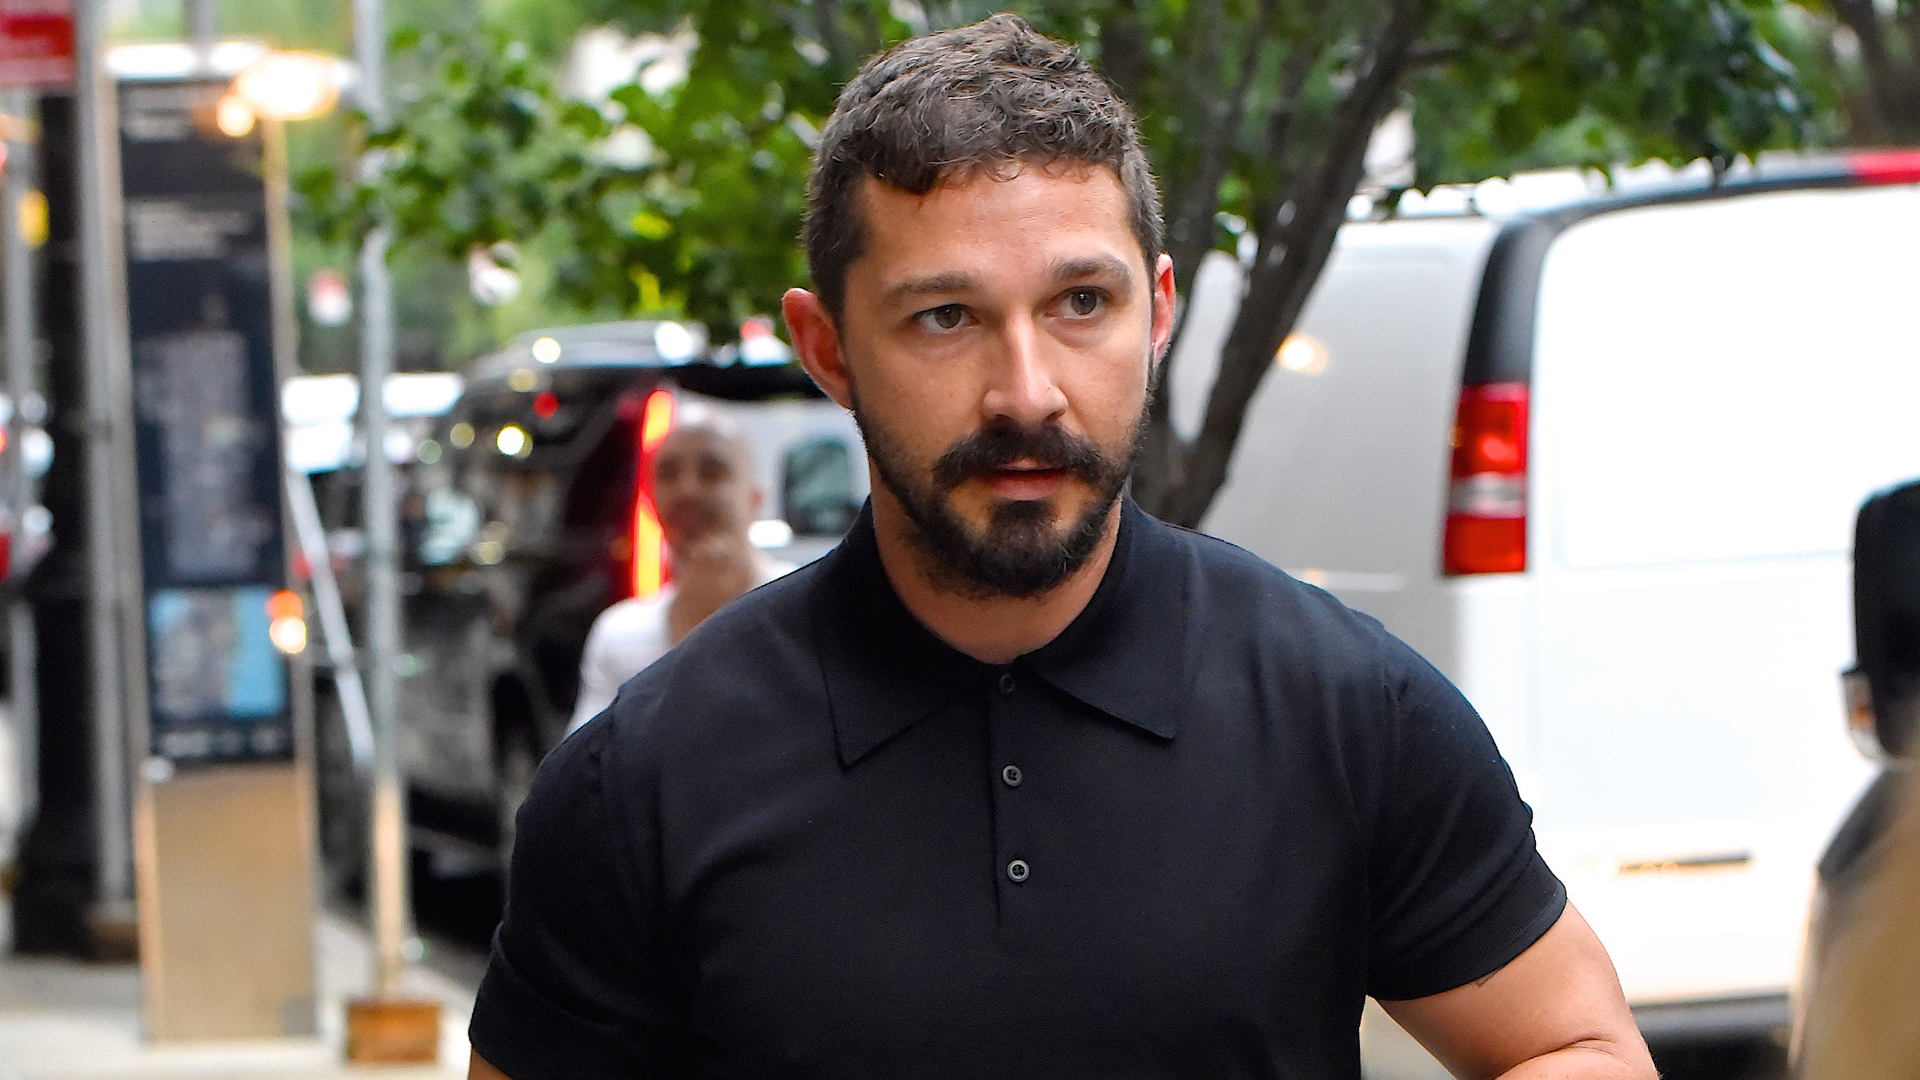 Shia LaBeouf is pictured outside in a city